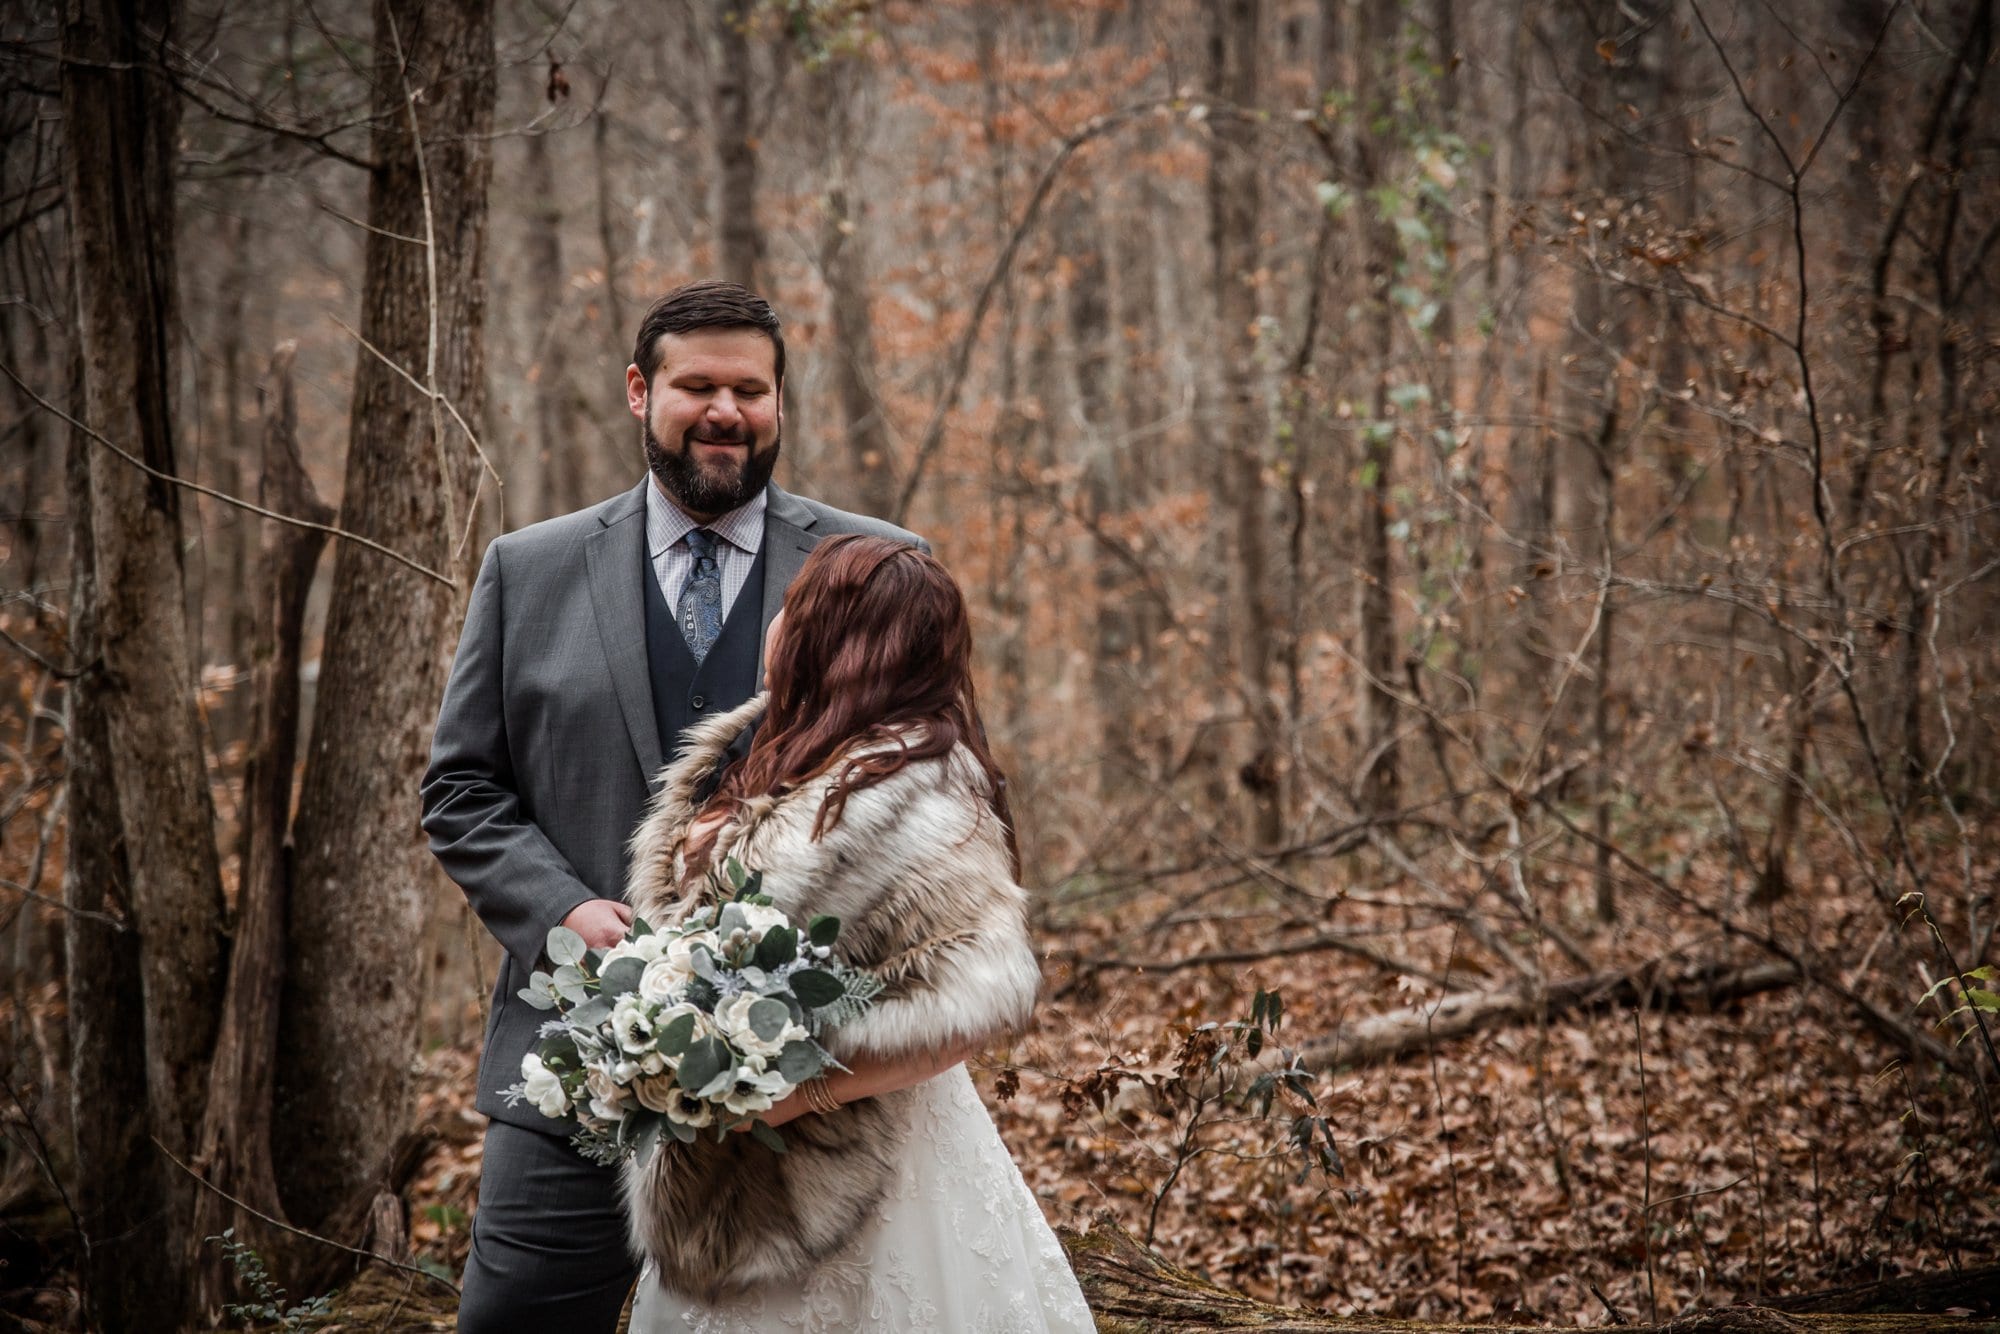 After the wedding in the Smokey Mountains at a Smokey Mountain elopement.